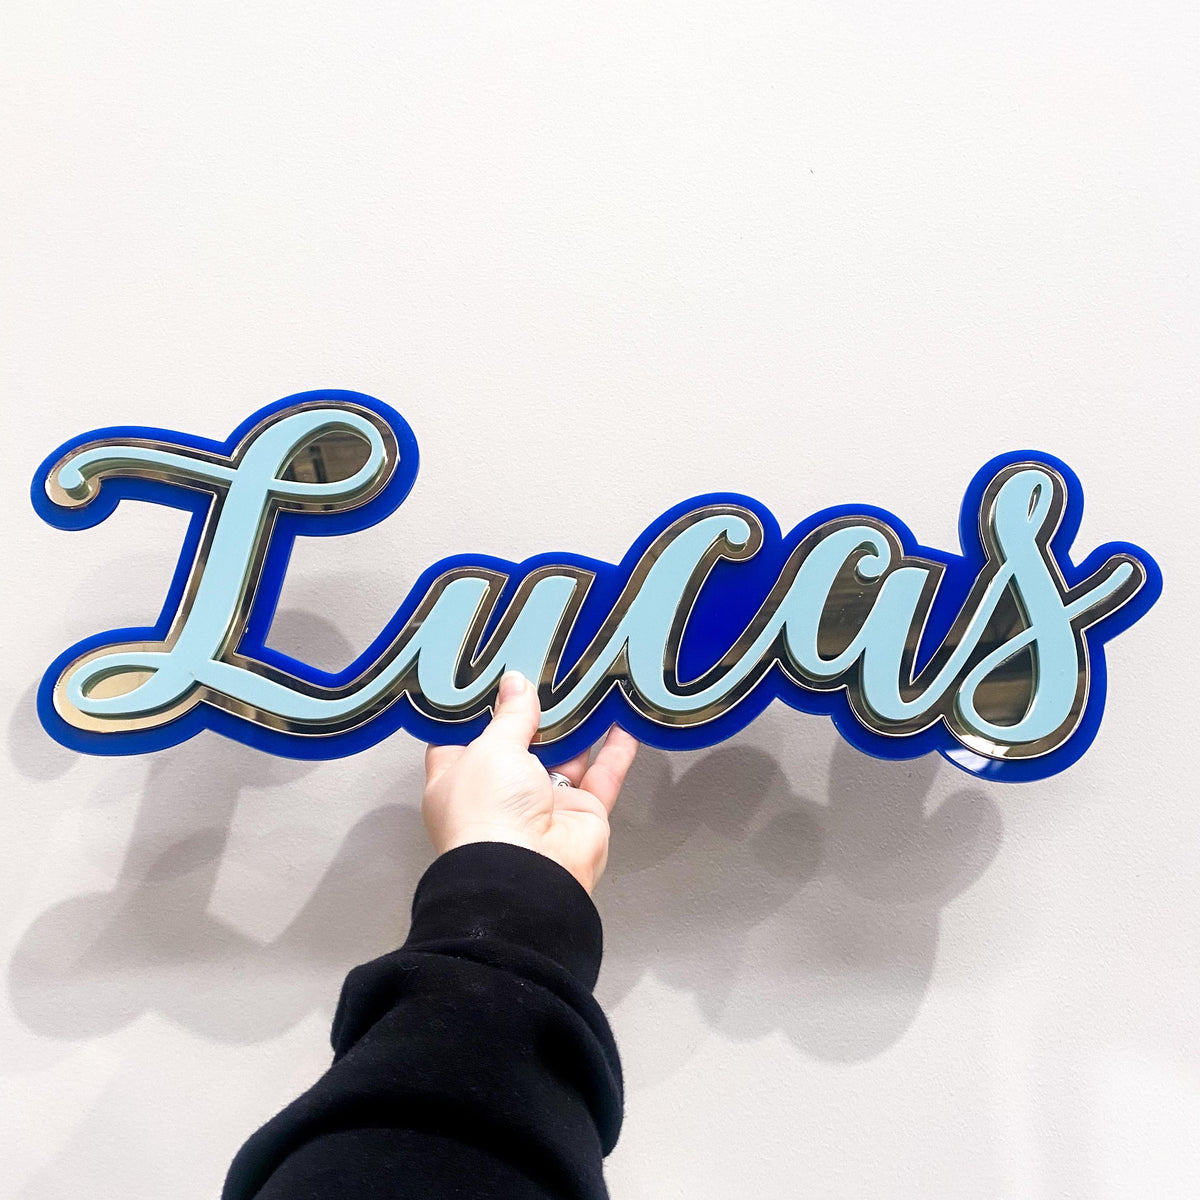 3D Name Plaque - Triple Layered